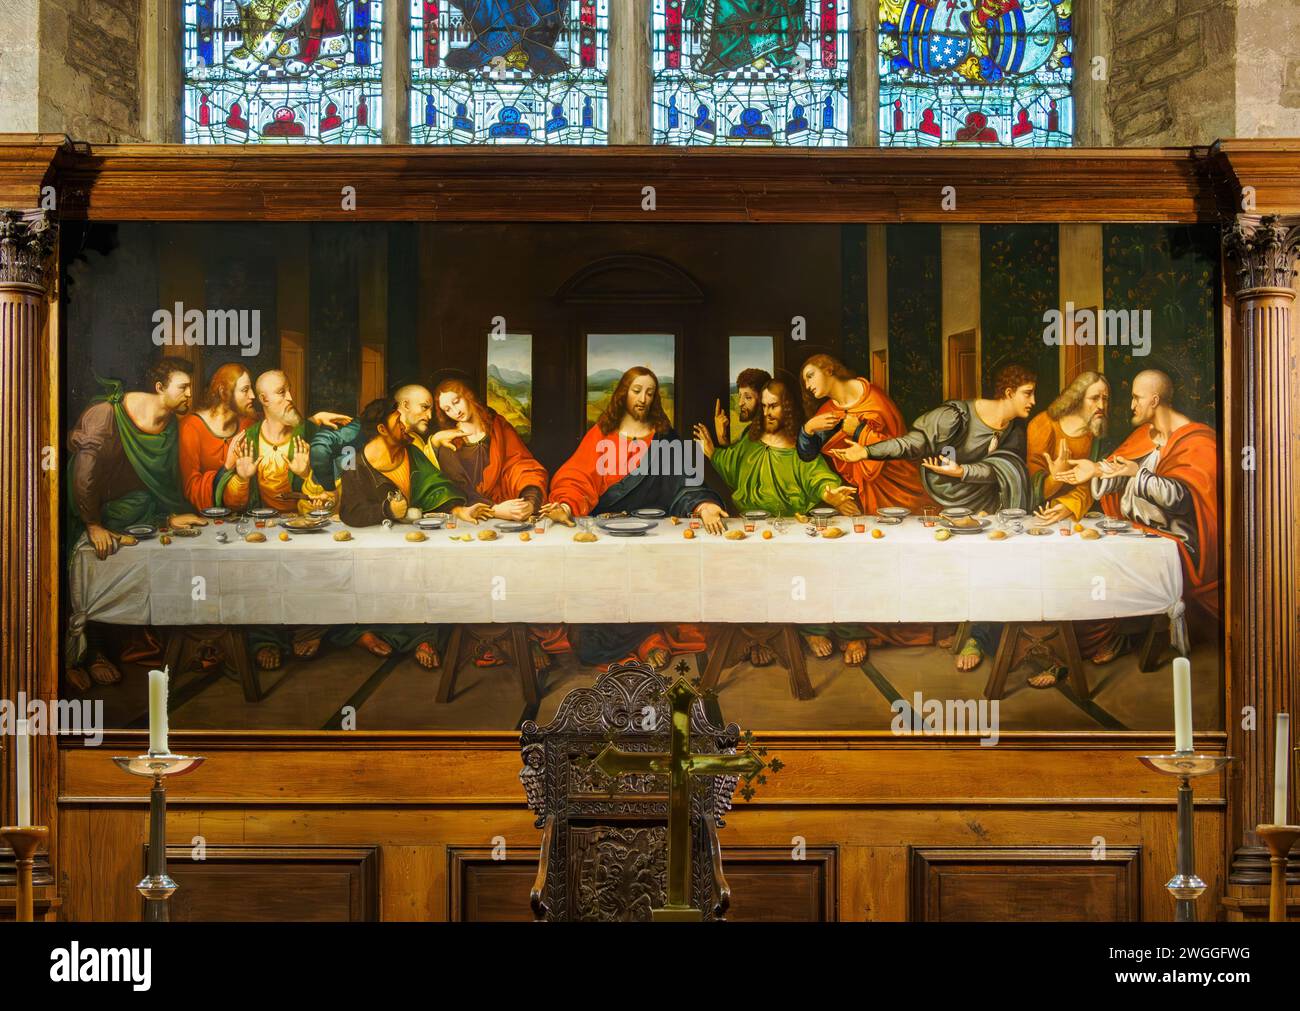 Copy of Da Vinci's Last Supper behind the altar in St Michael and All Angels parish church in Ledbury Herefordshire UK Stock Photo